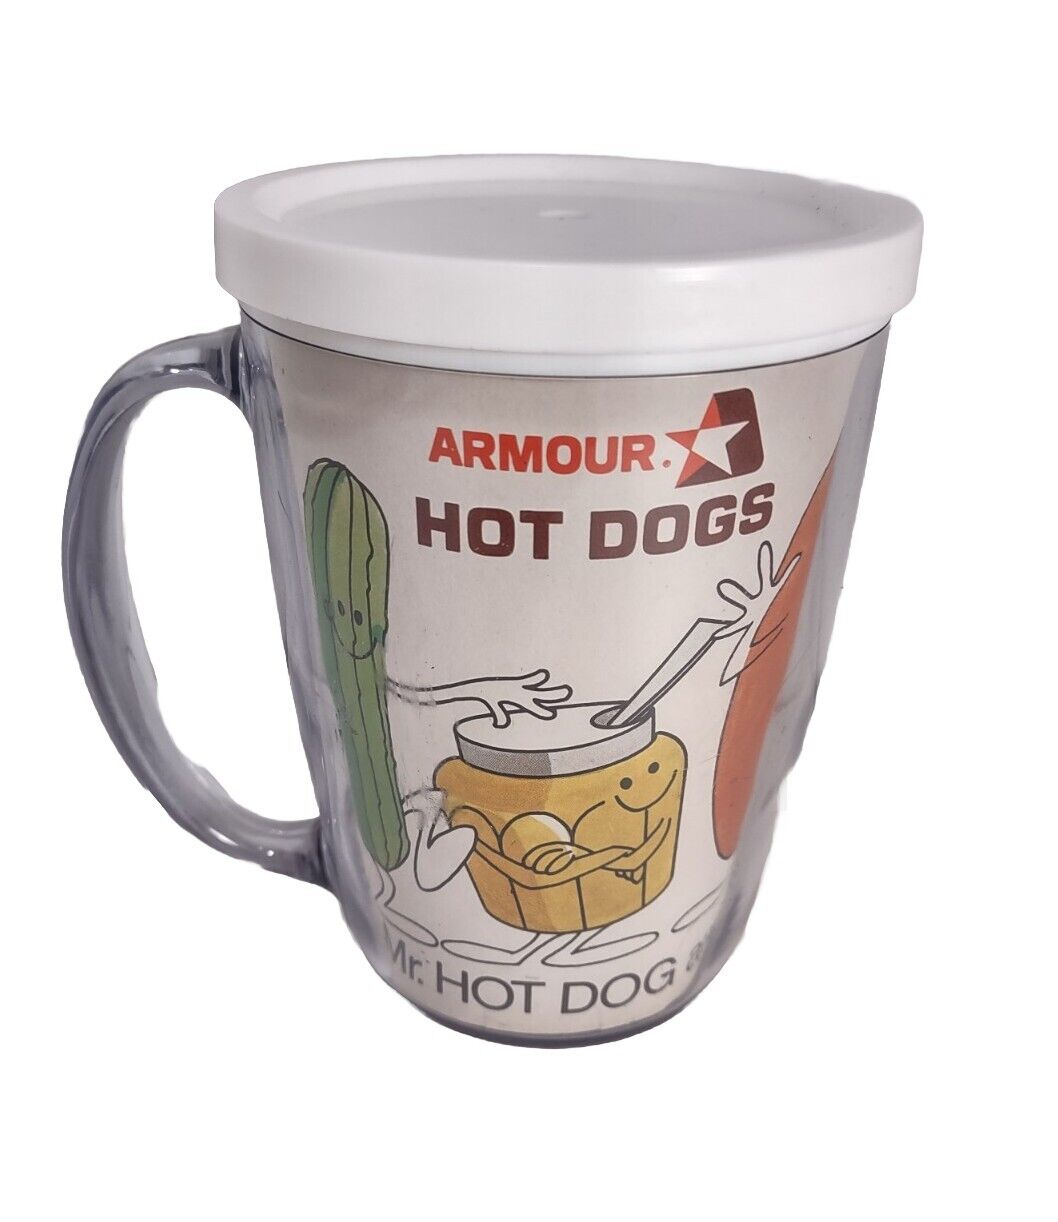 Armour Mr Hot Dog And Friends Mug With Secure Snap Lid Advertising Collectable 